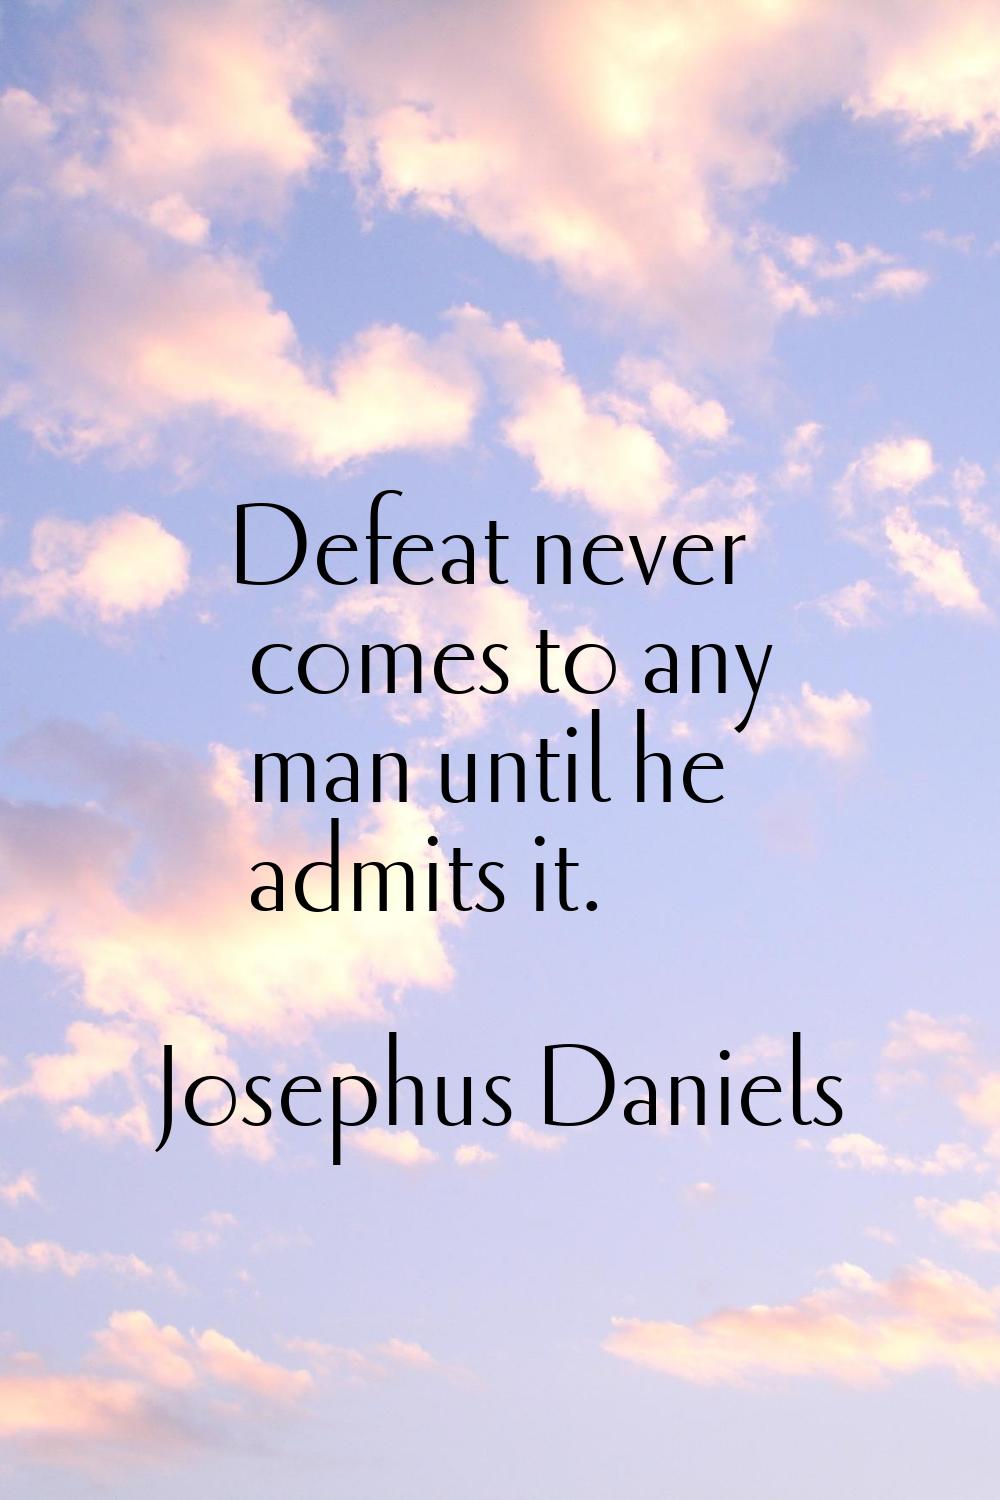 Defeat never comes to any man until he admits it.